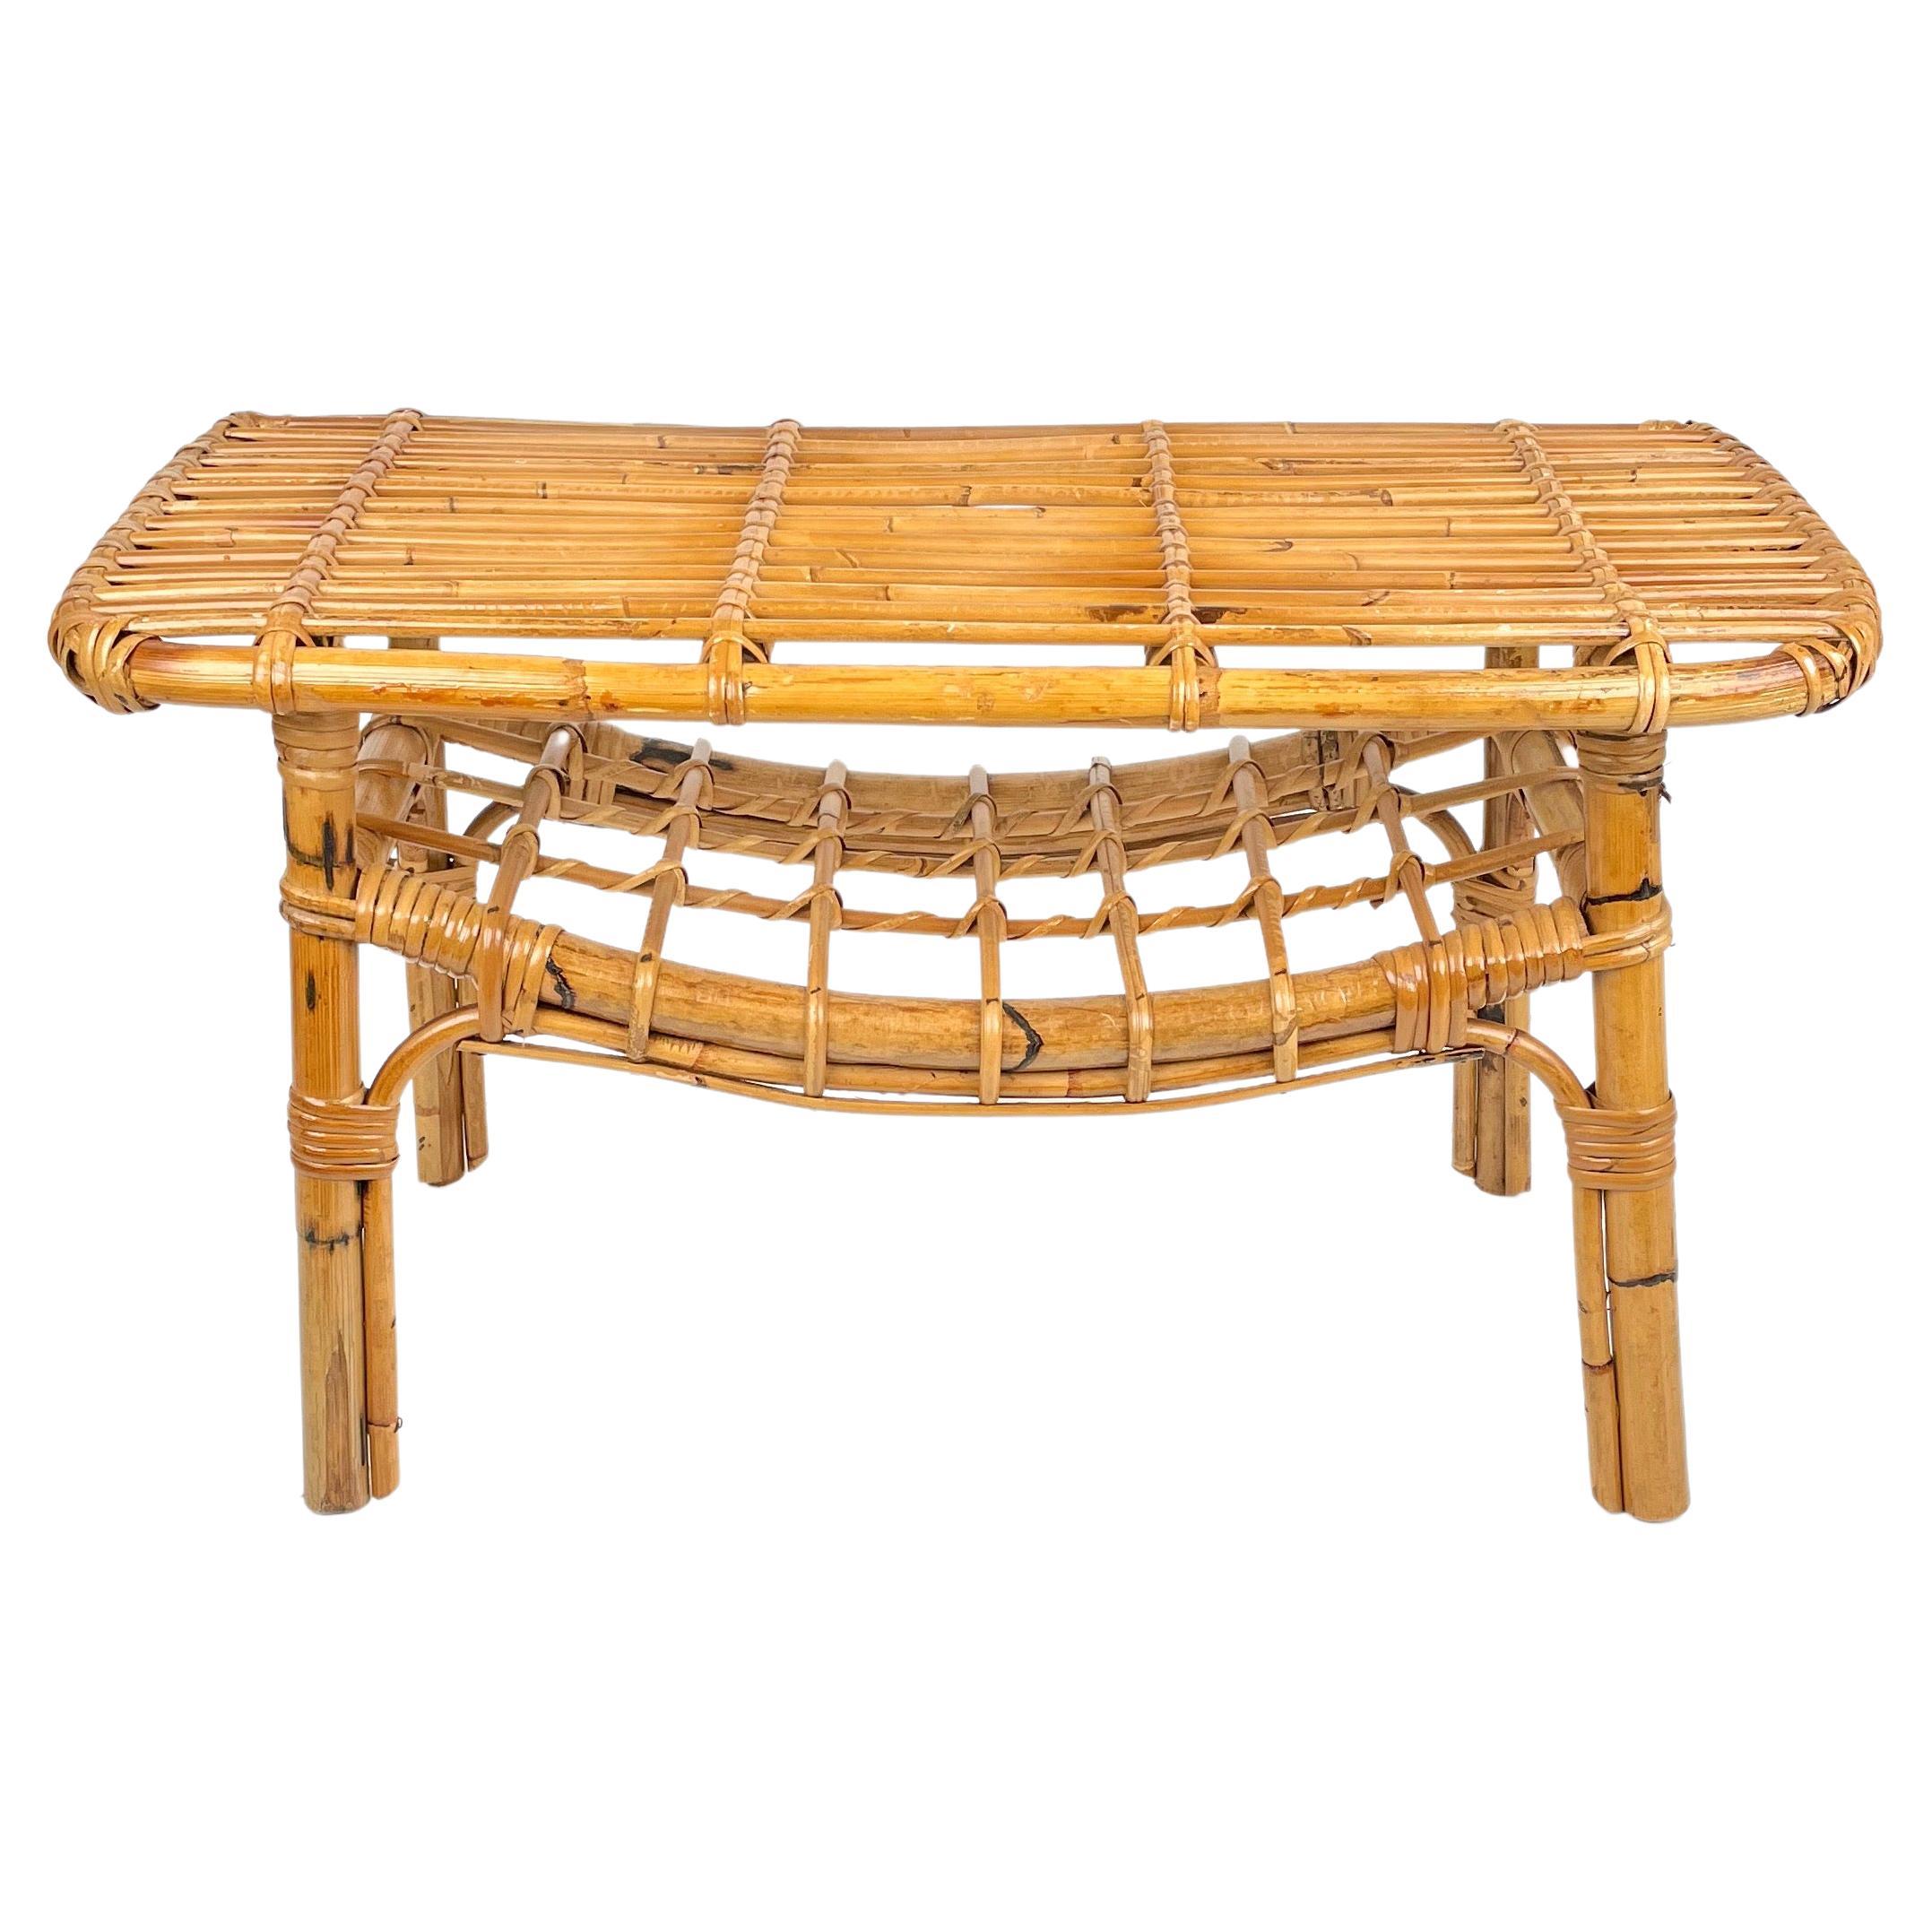 Mid-Century Modern coffee table or stool with magazine rack, perfect in any entry hallway as well as next to a sofa or in any bathroom. Beauty of the woven materials is timeless and classic, making bamboo and rattan furniture incredibly versatile.